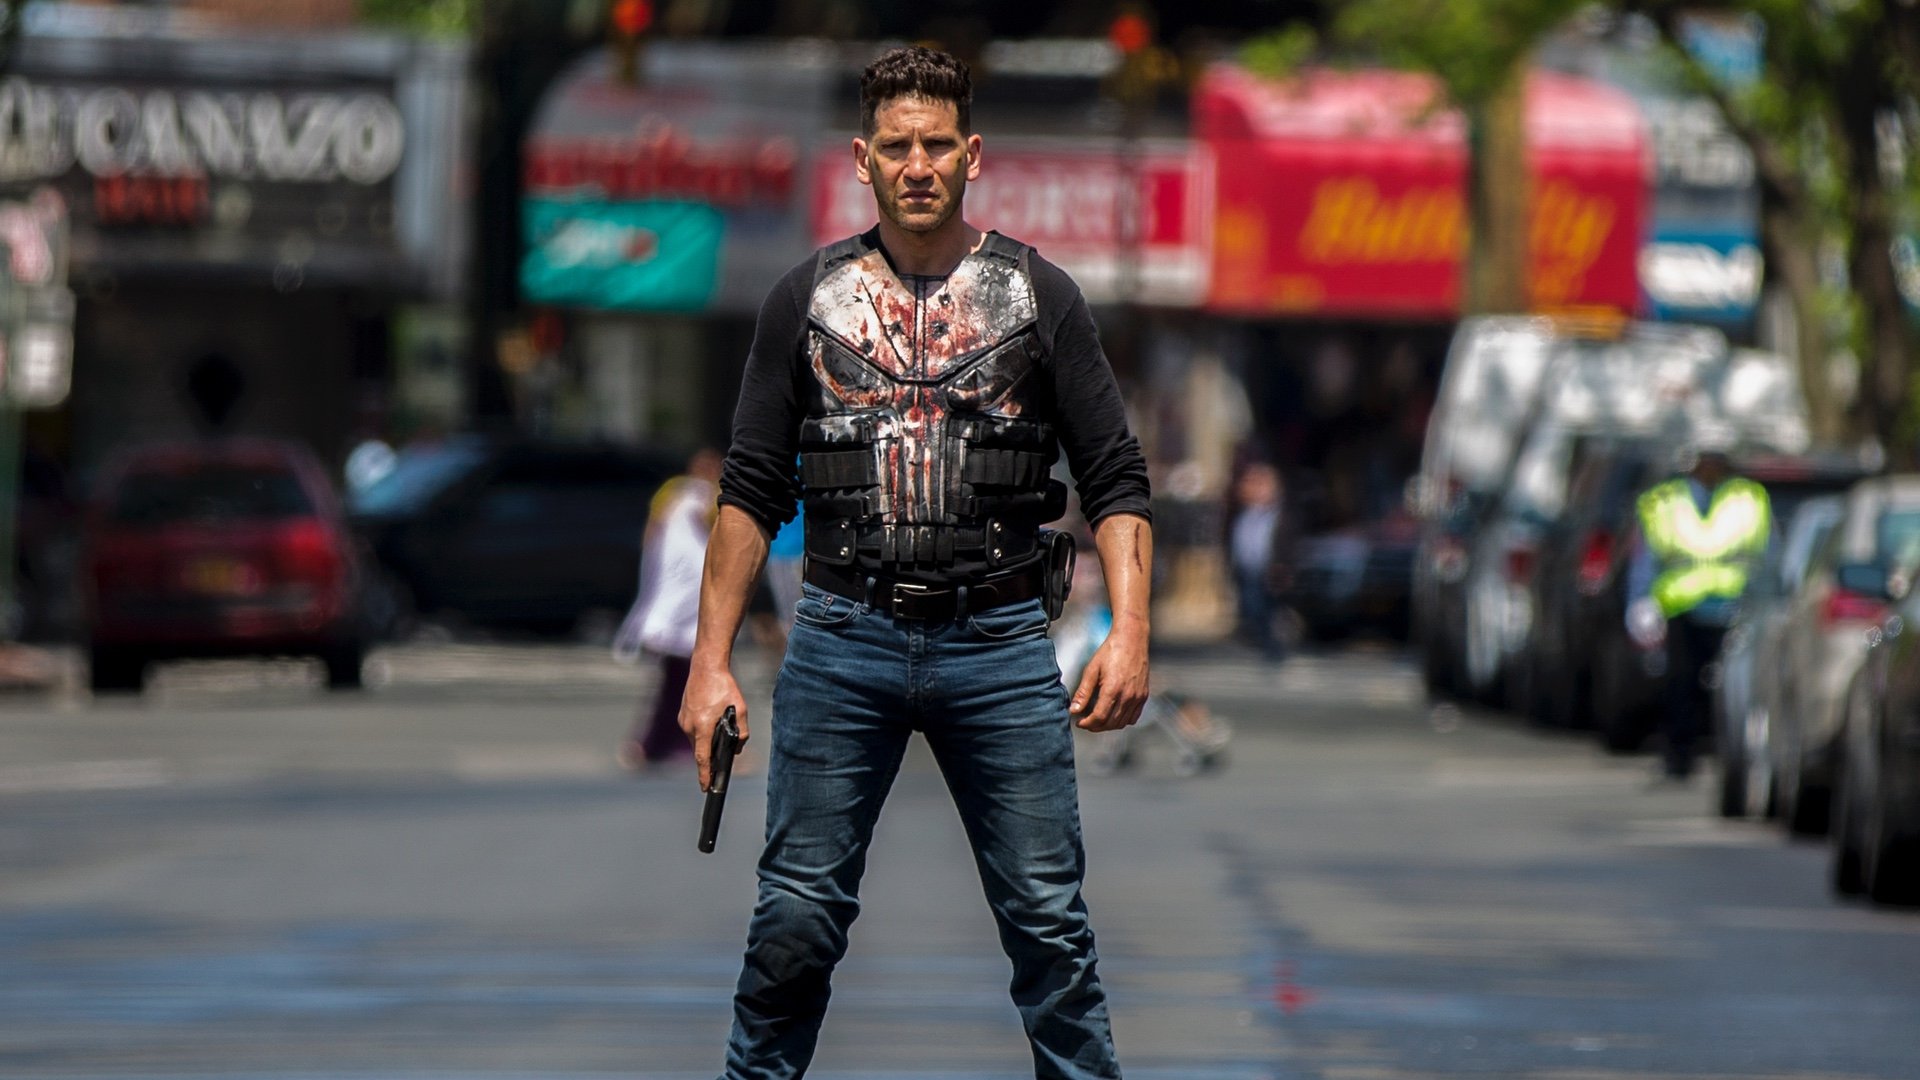 Frank Castle is on The Hunt in These New Photo and Posters For Marvel's THE PUNISHER